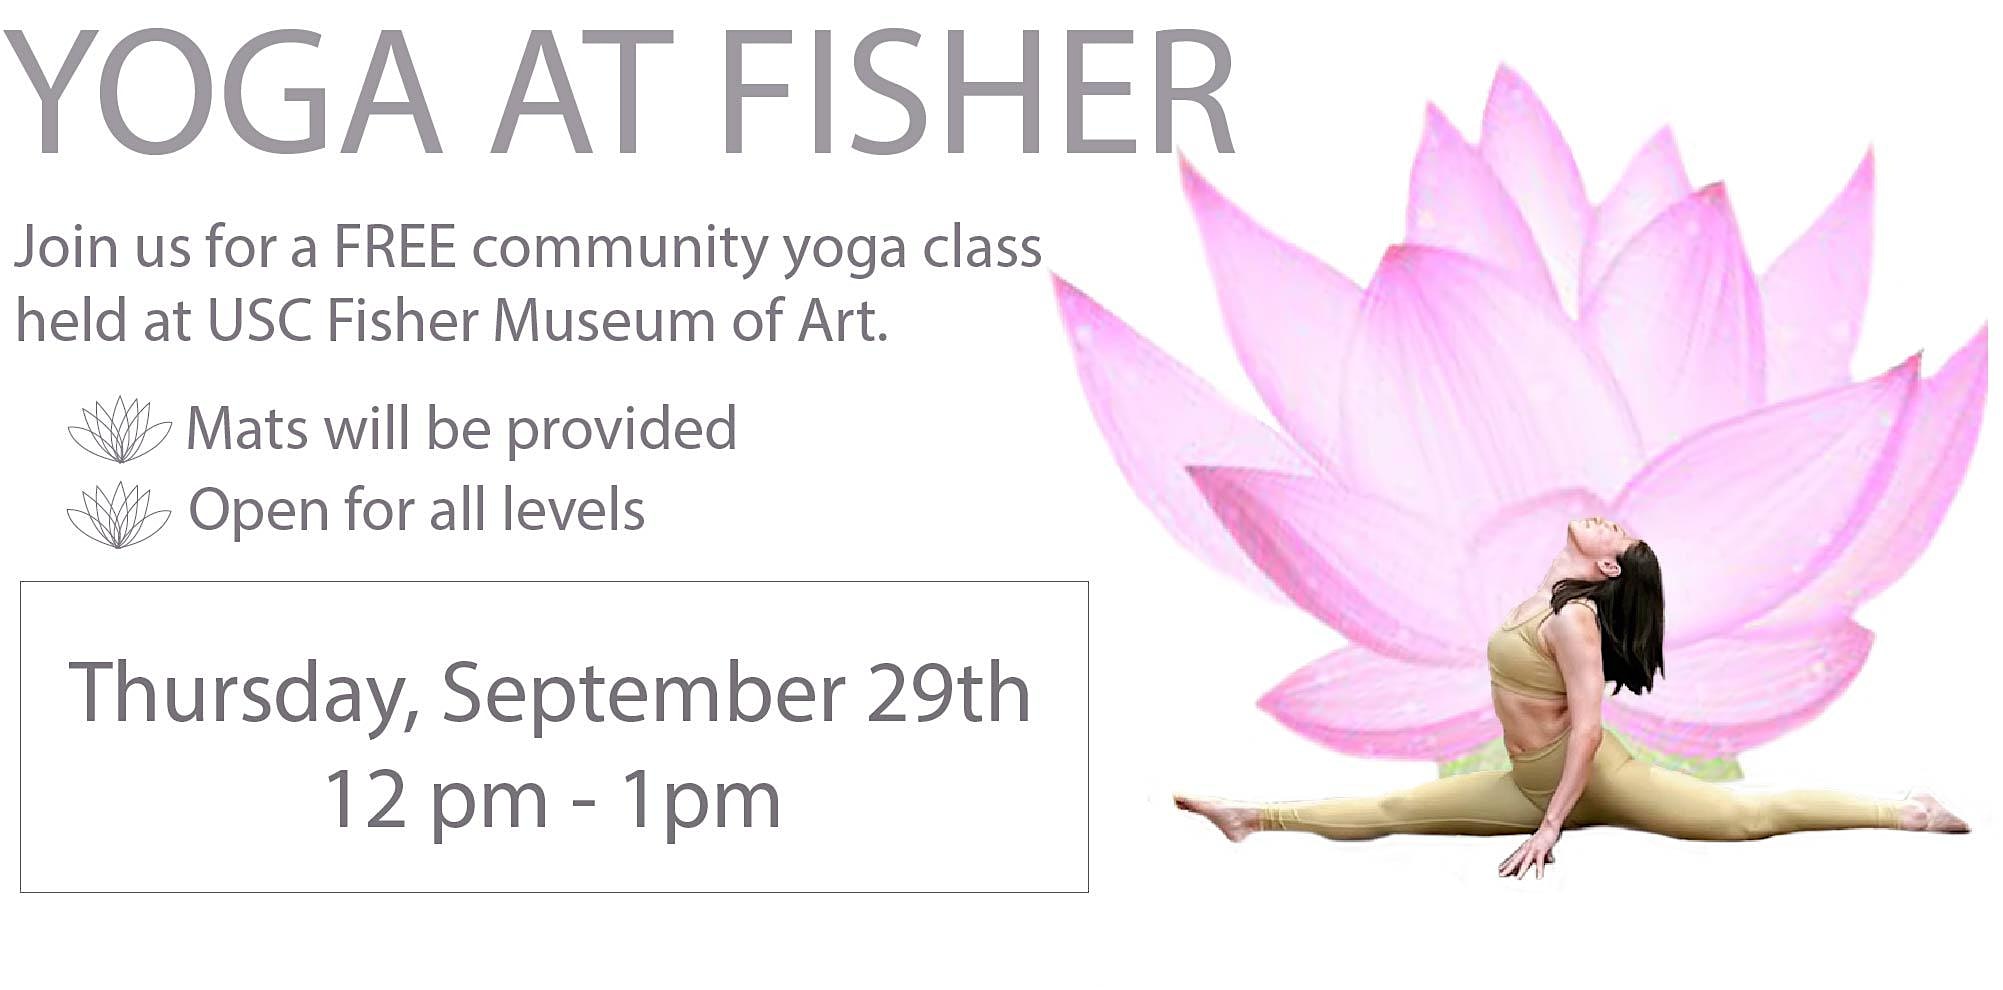 Yoga at Fisher